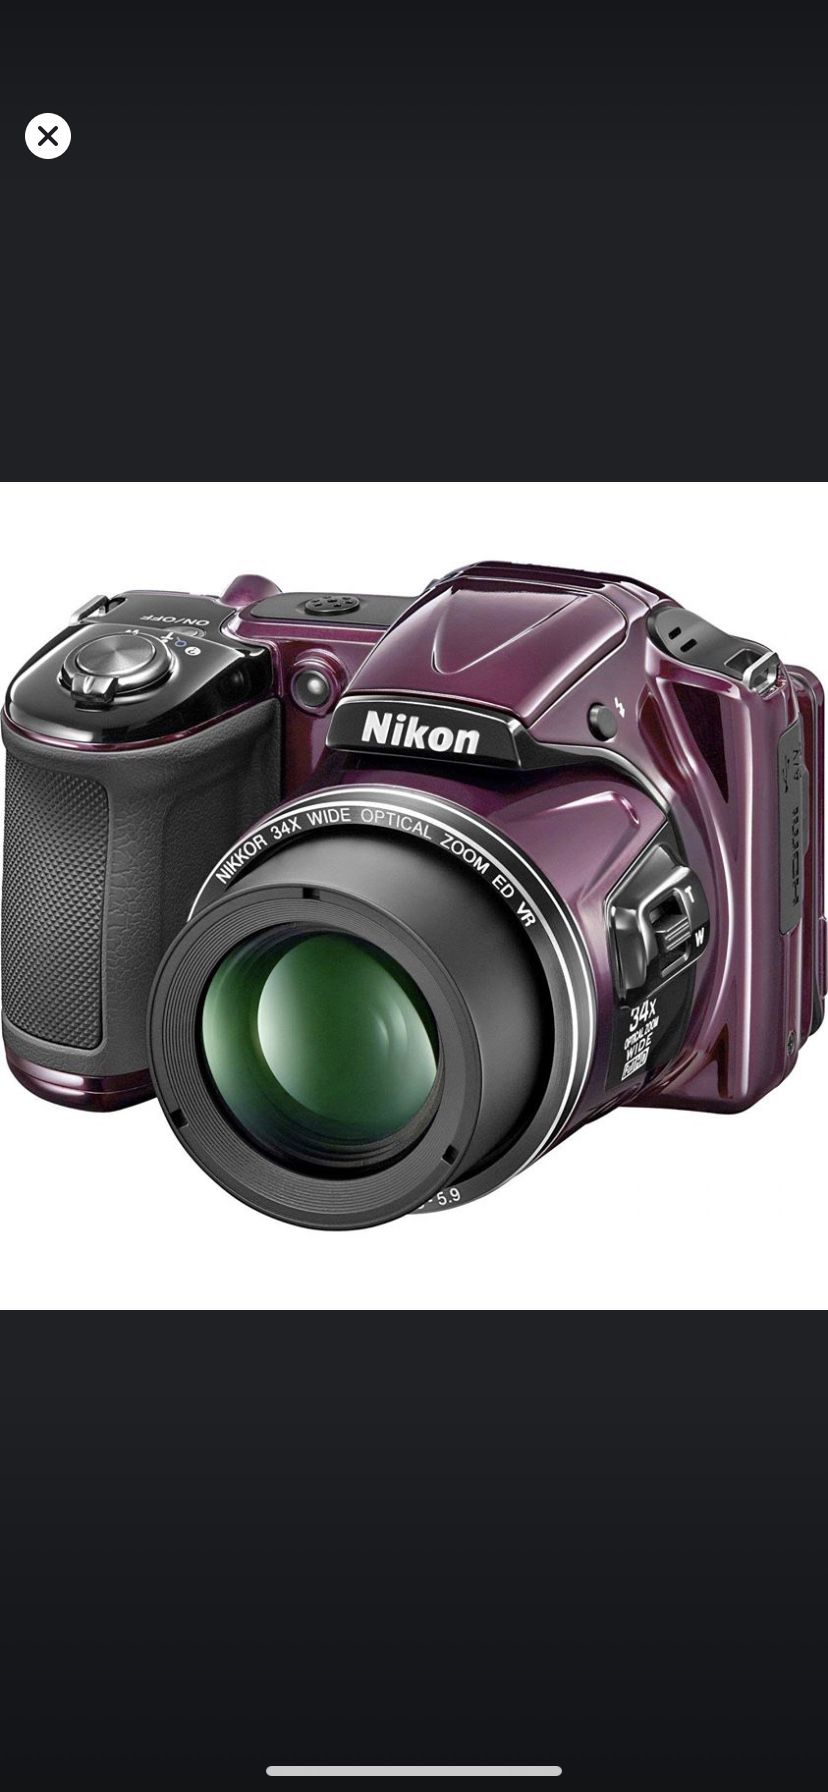 Nikon COOLPIX L830 16 MP Digital Camera with 34x Zoom NIKKOR Lens and Full 1080p HD Video (Plum)